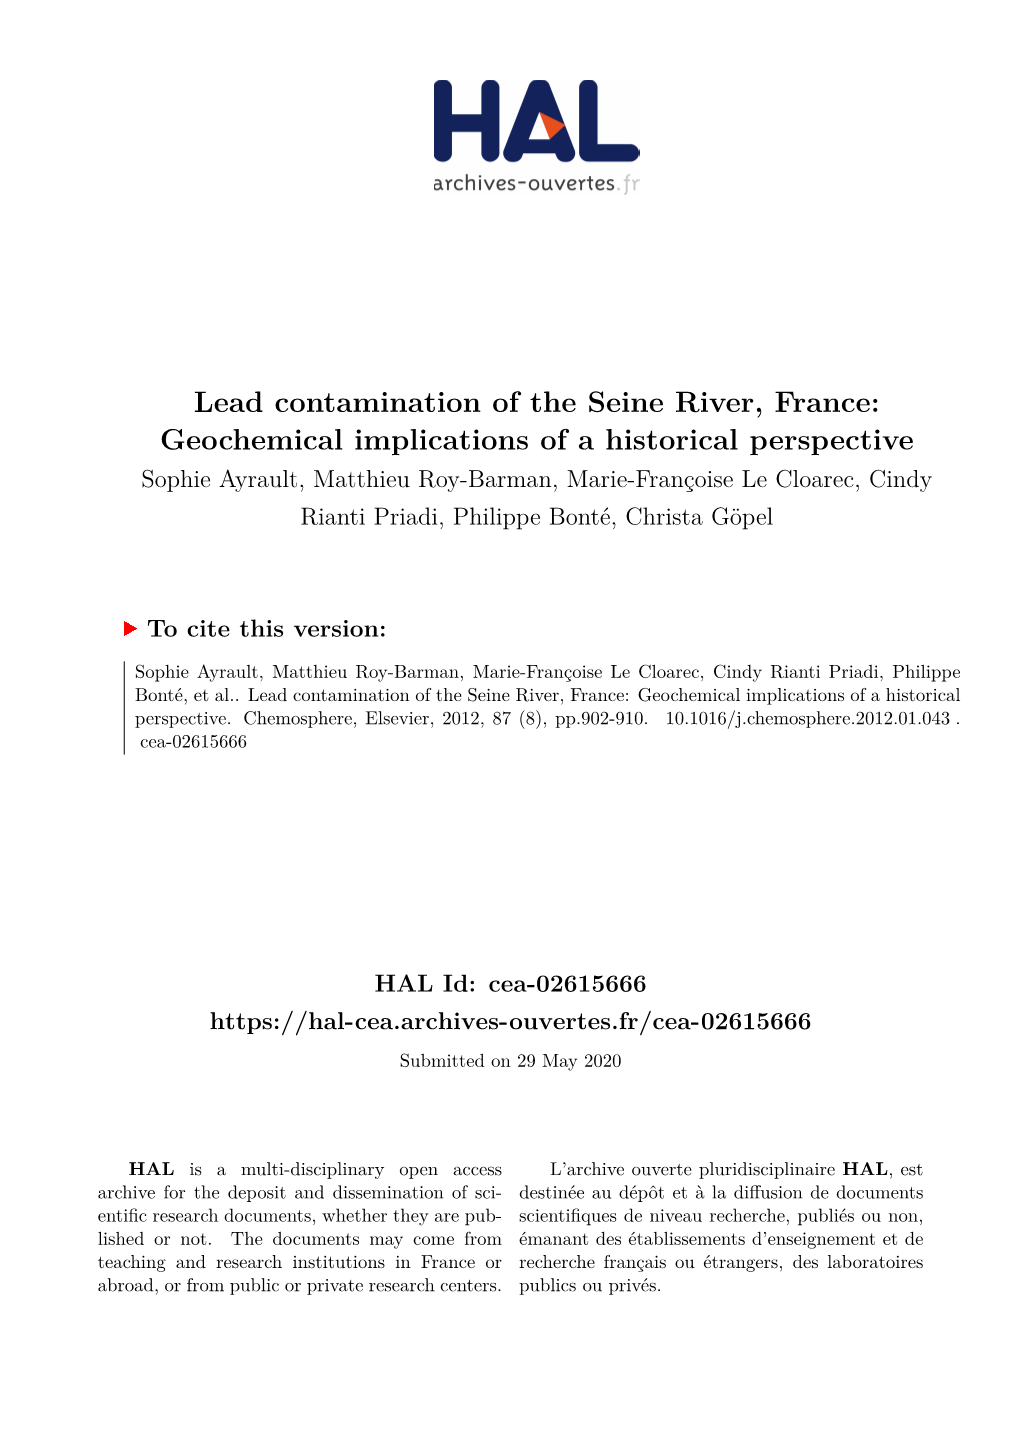 Lead Contamination of the Seine River, France